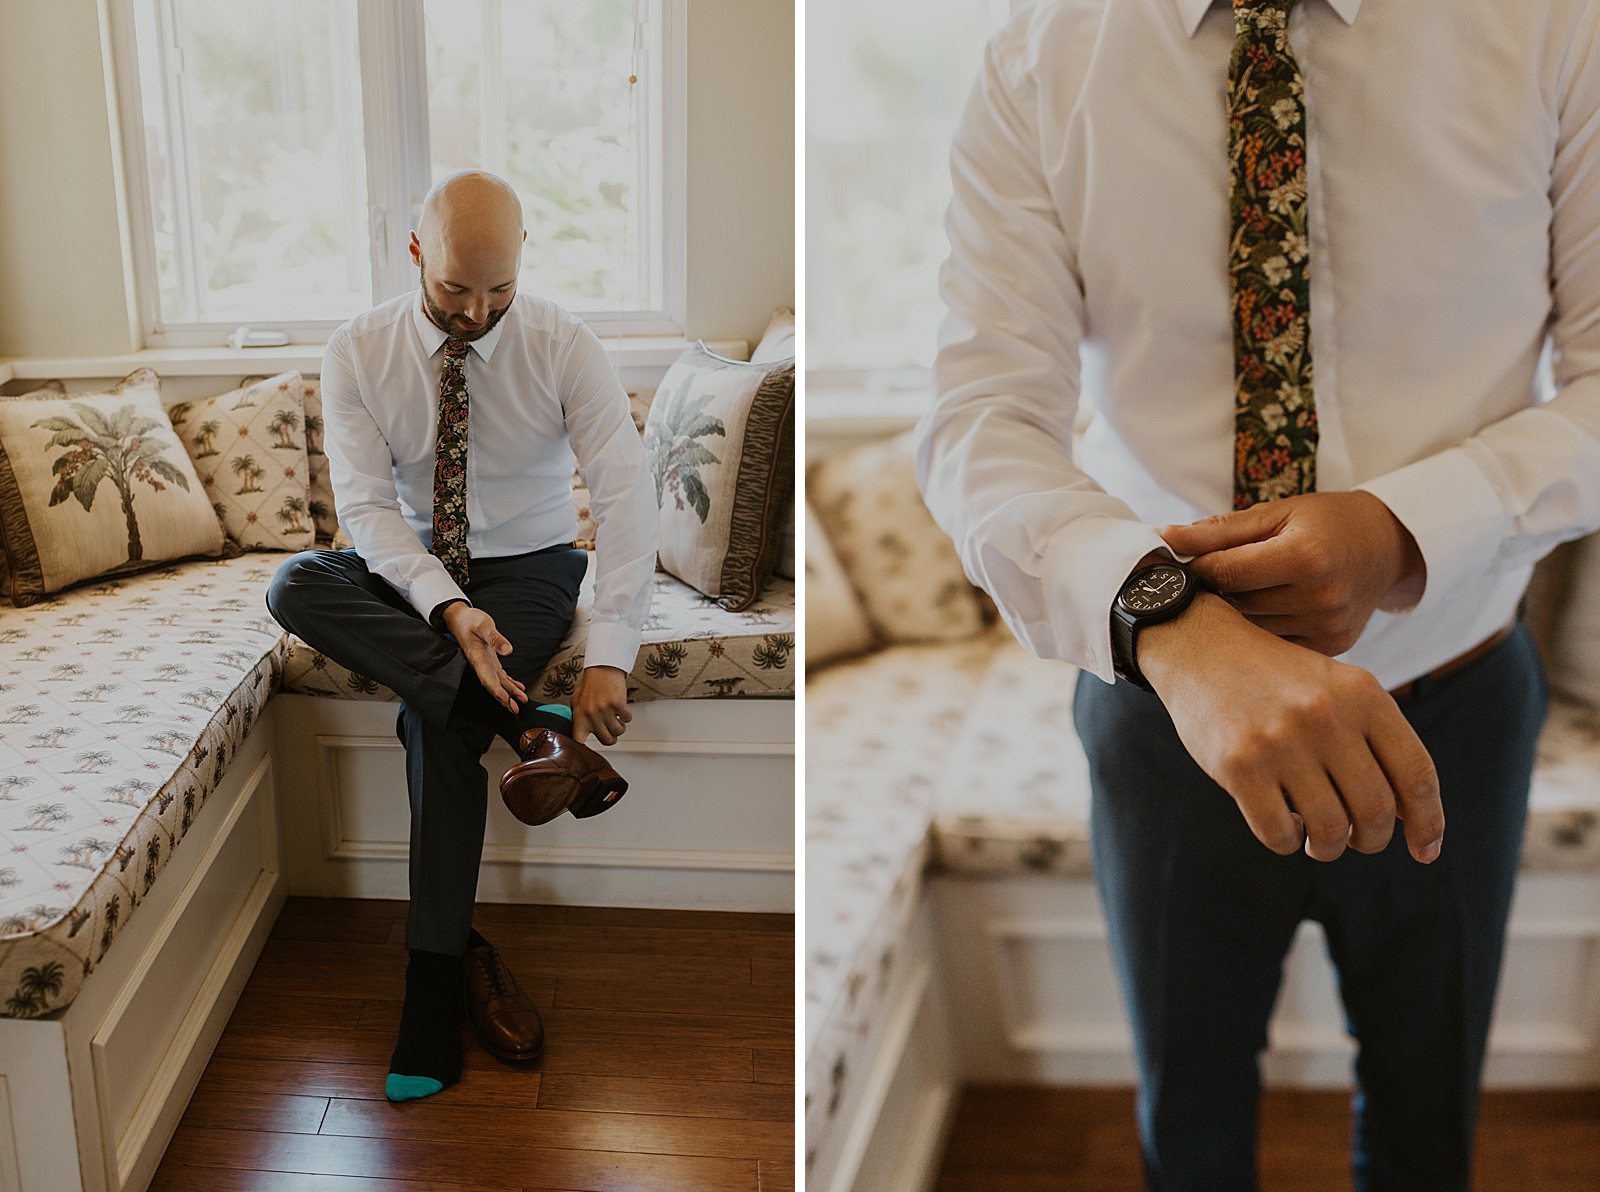 Groom getting ready putting shoes on and adjusting cuff